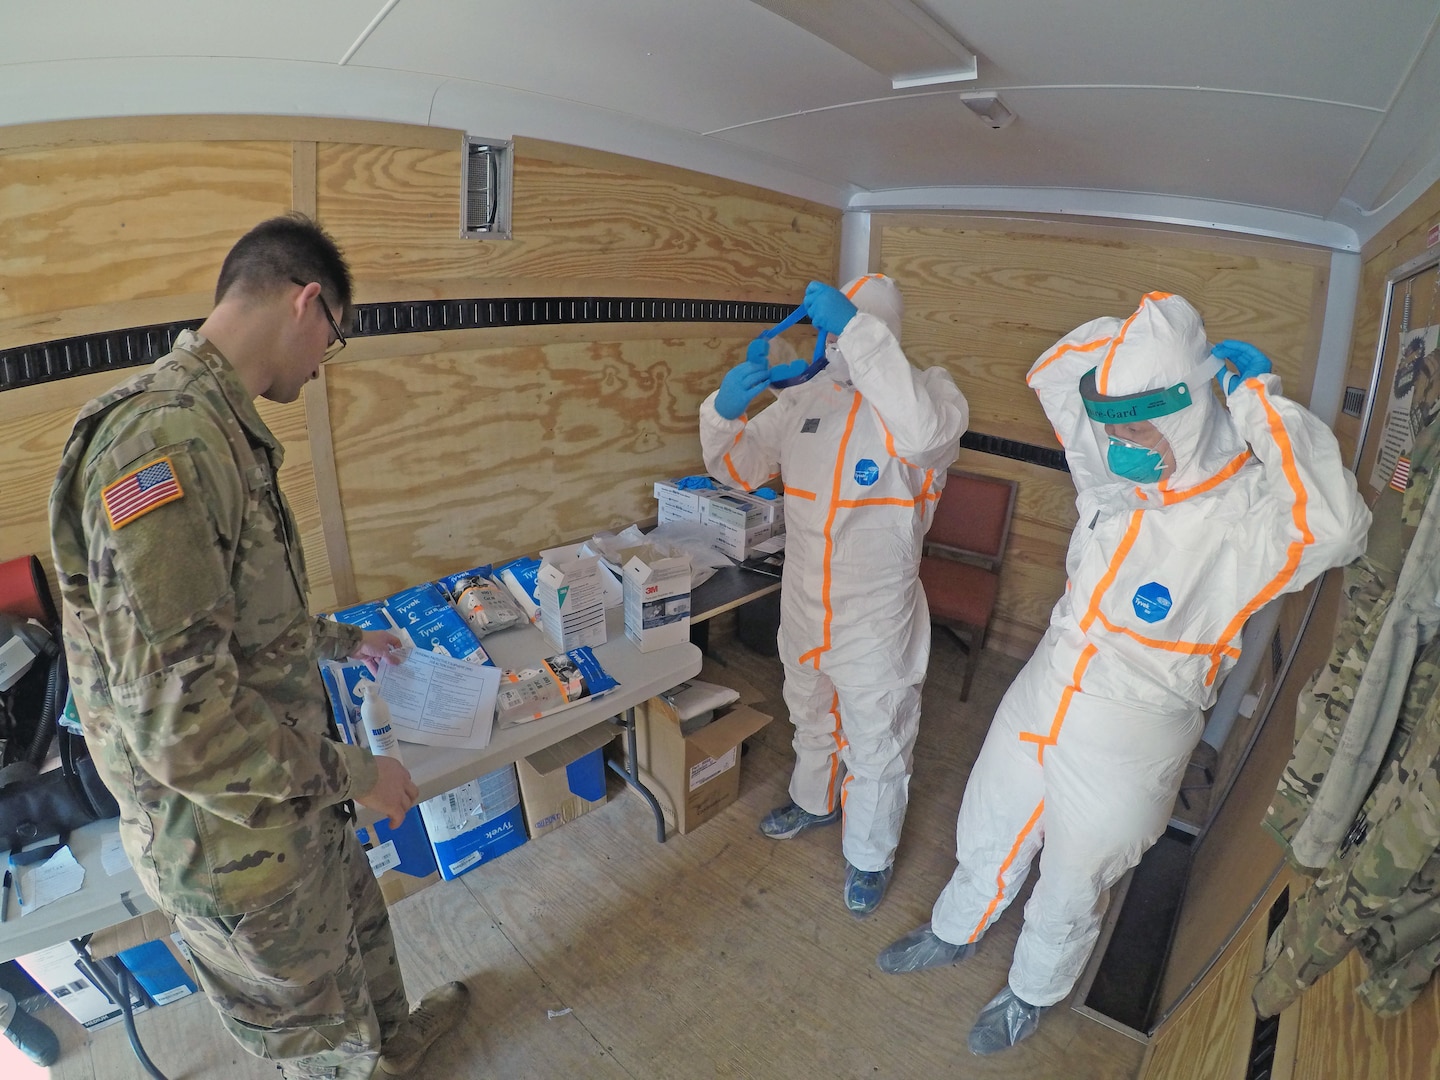 The California Army National Guard’s Pfc. Michael Daggi of the California National Guard Medical Detachment instructs California Emergency Medical Service Authority (EMSA) staff members on properly applying personal protective equipment March 27 at a San Mateo County, California, COVID-19 treatment facility.